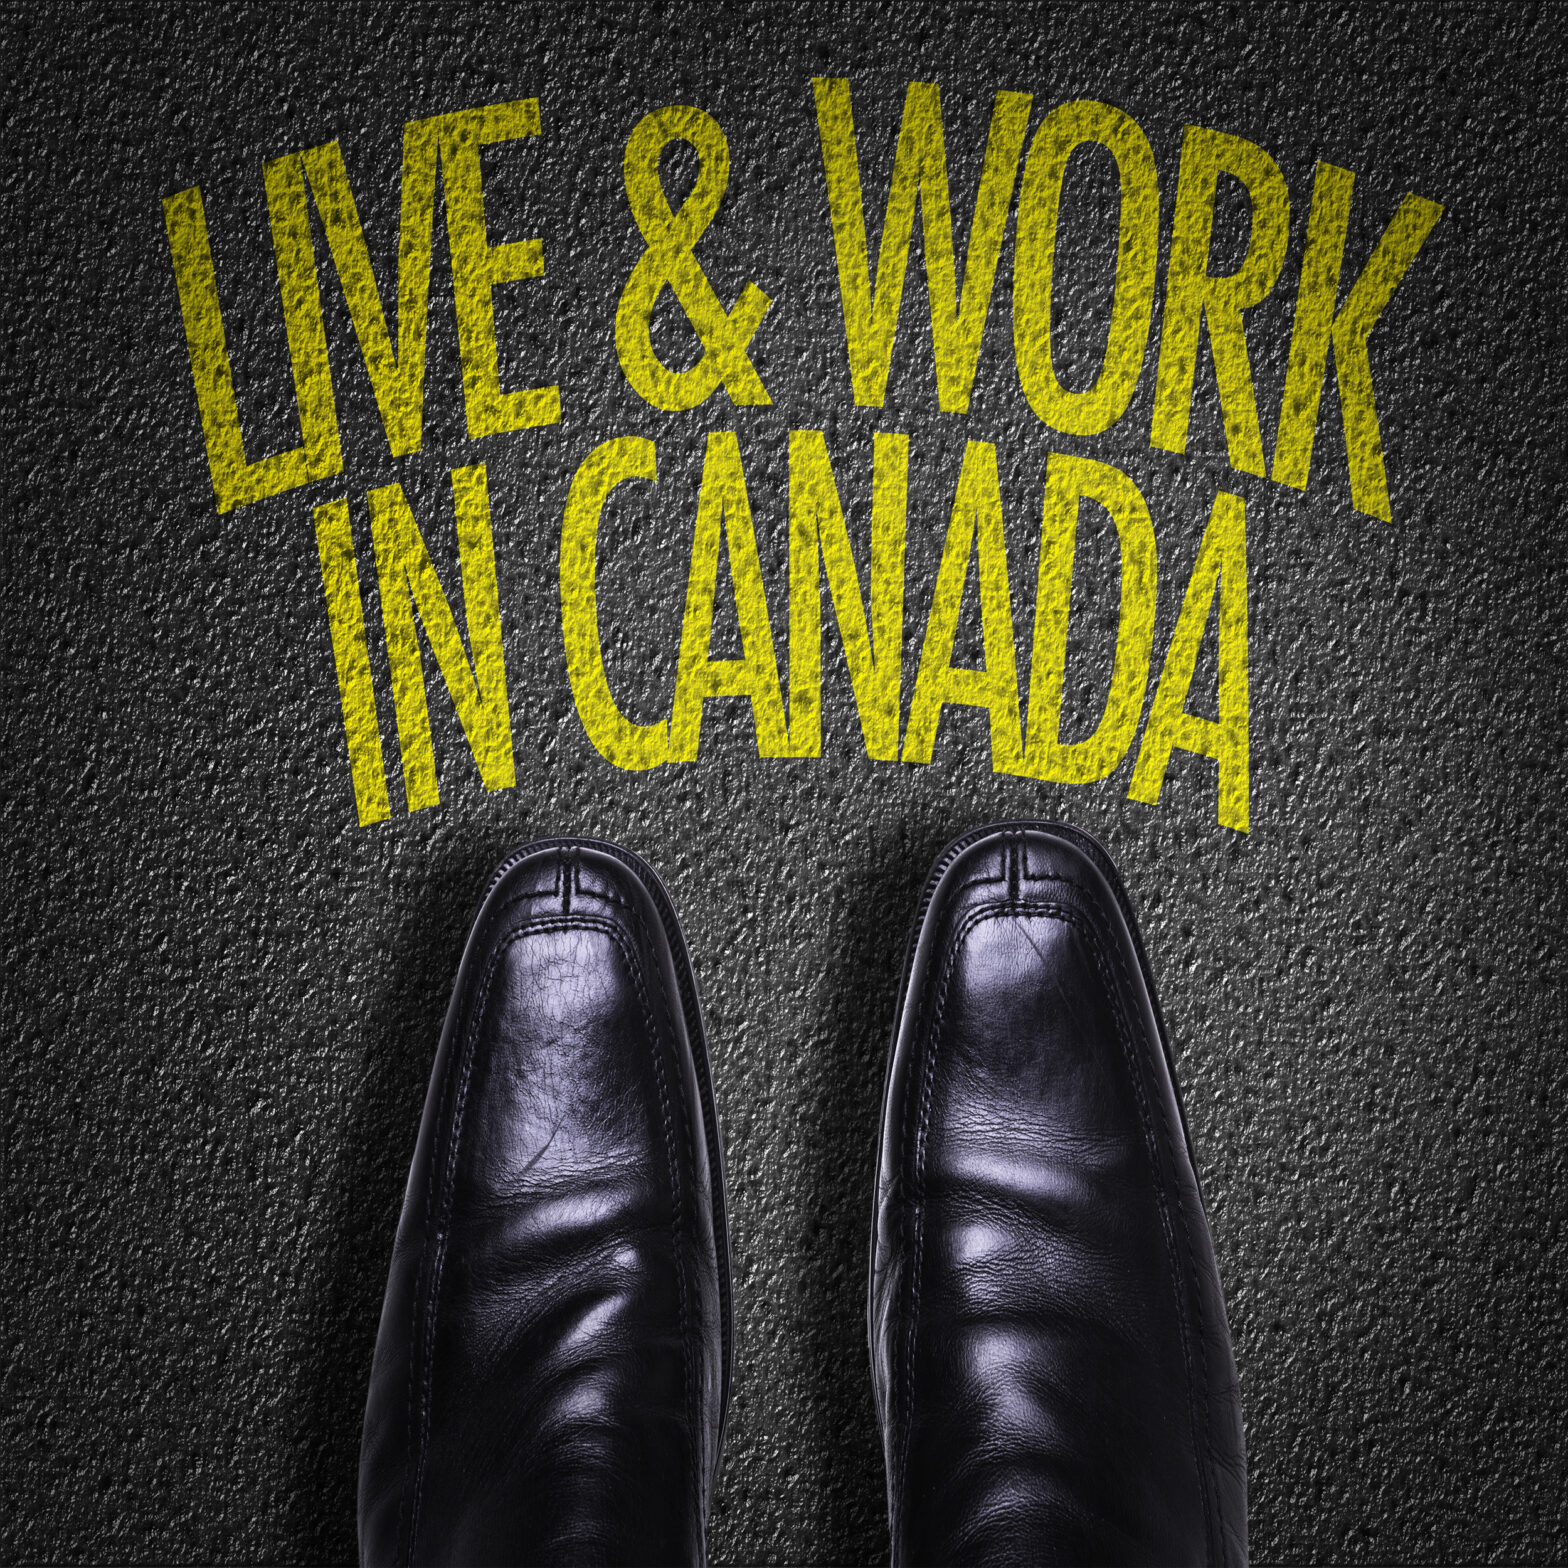 live-work-in-canada